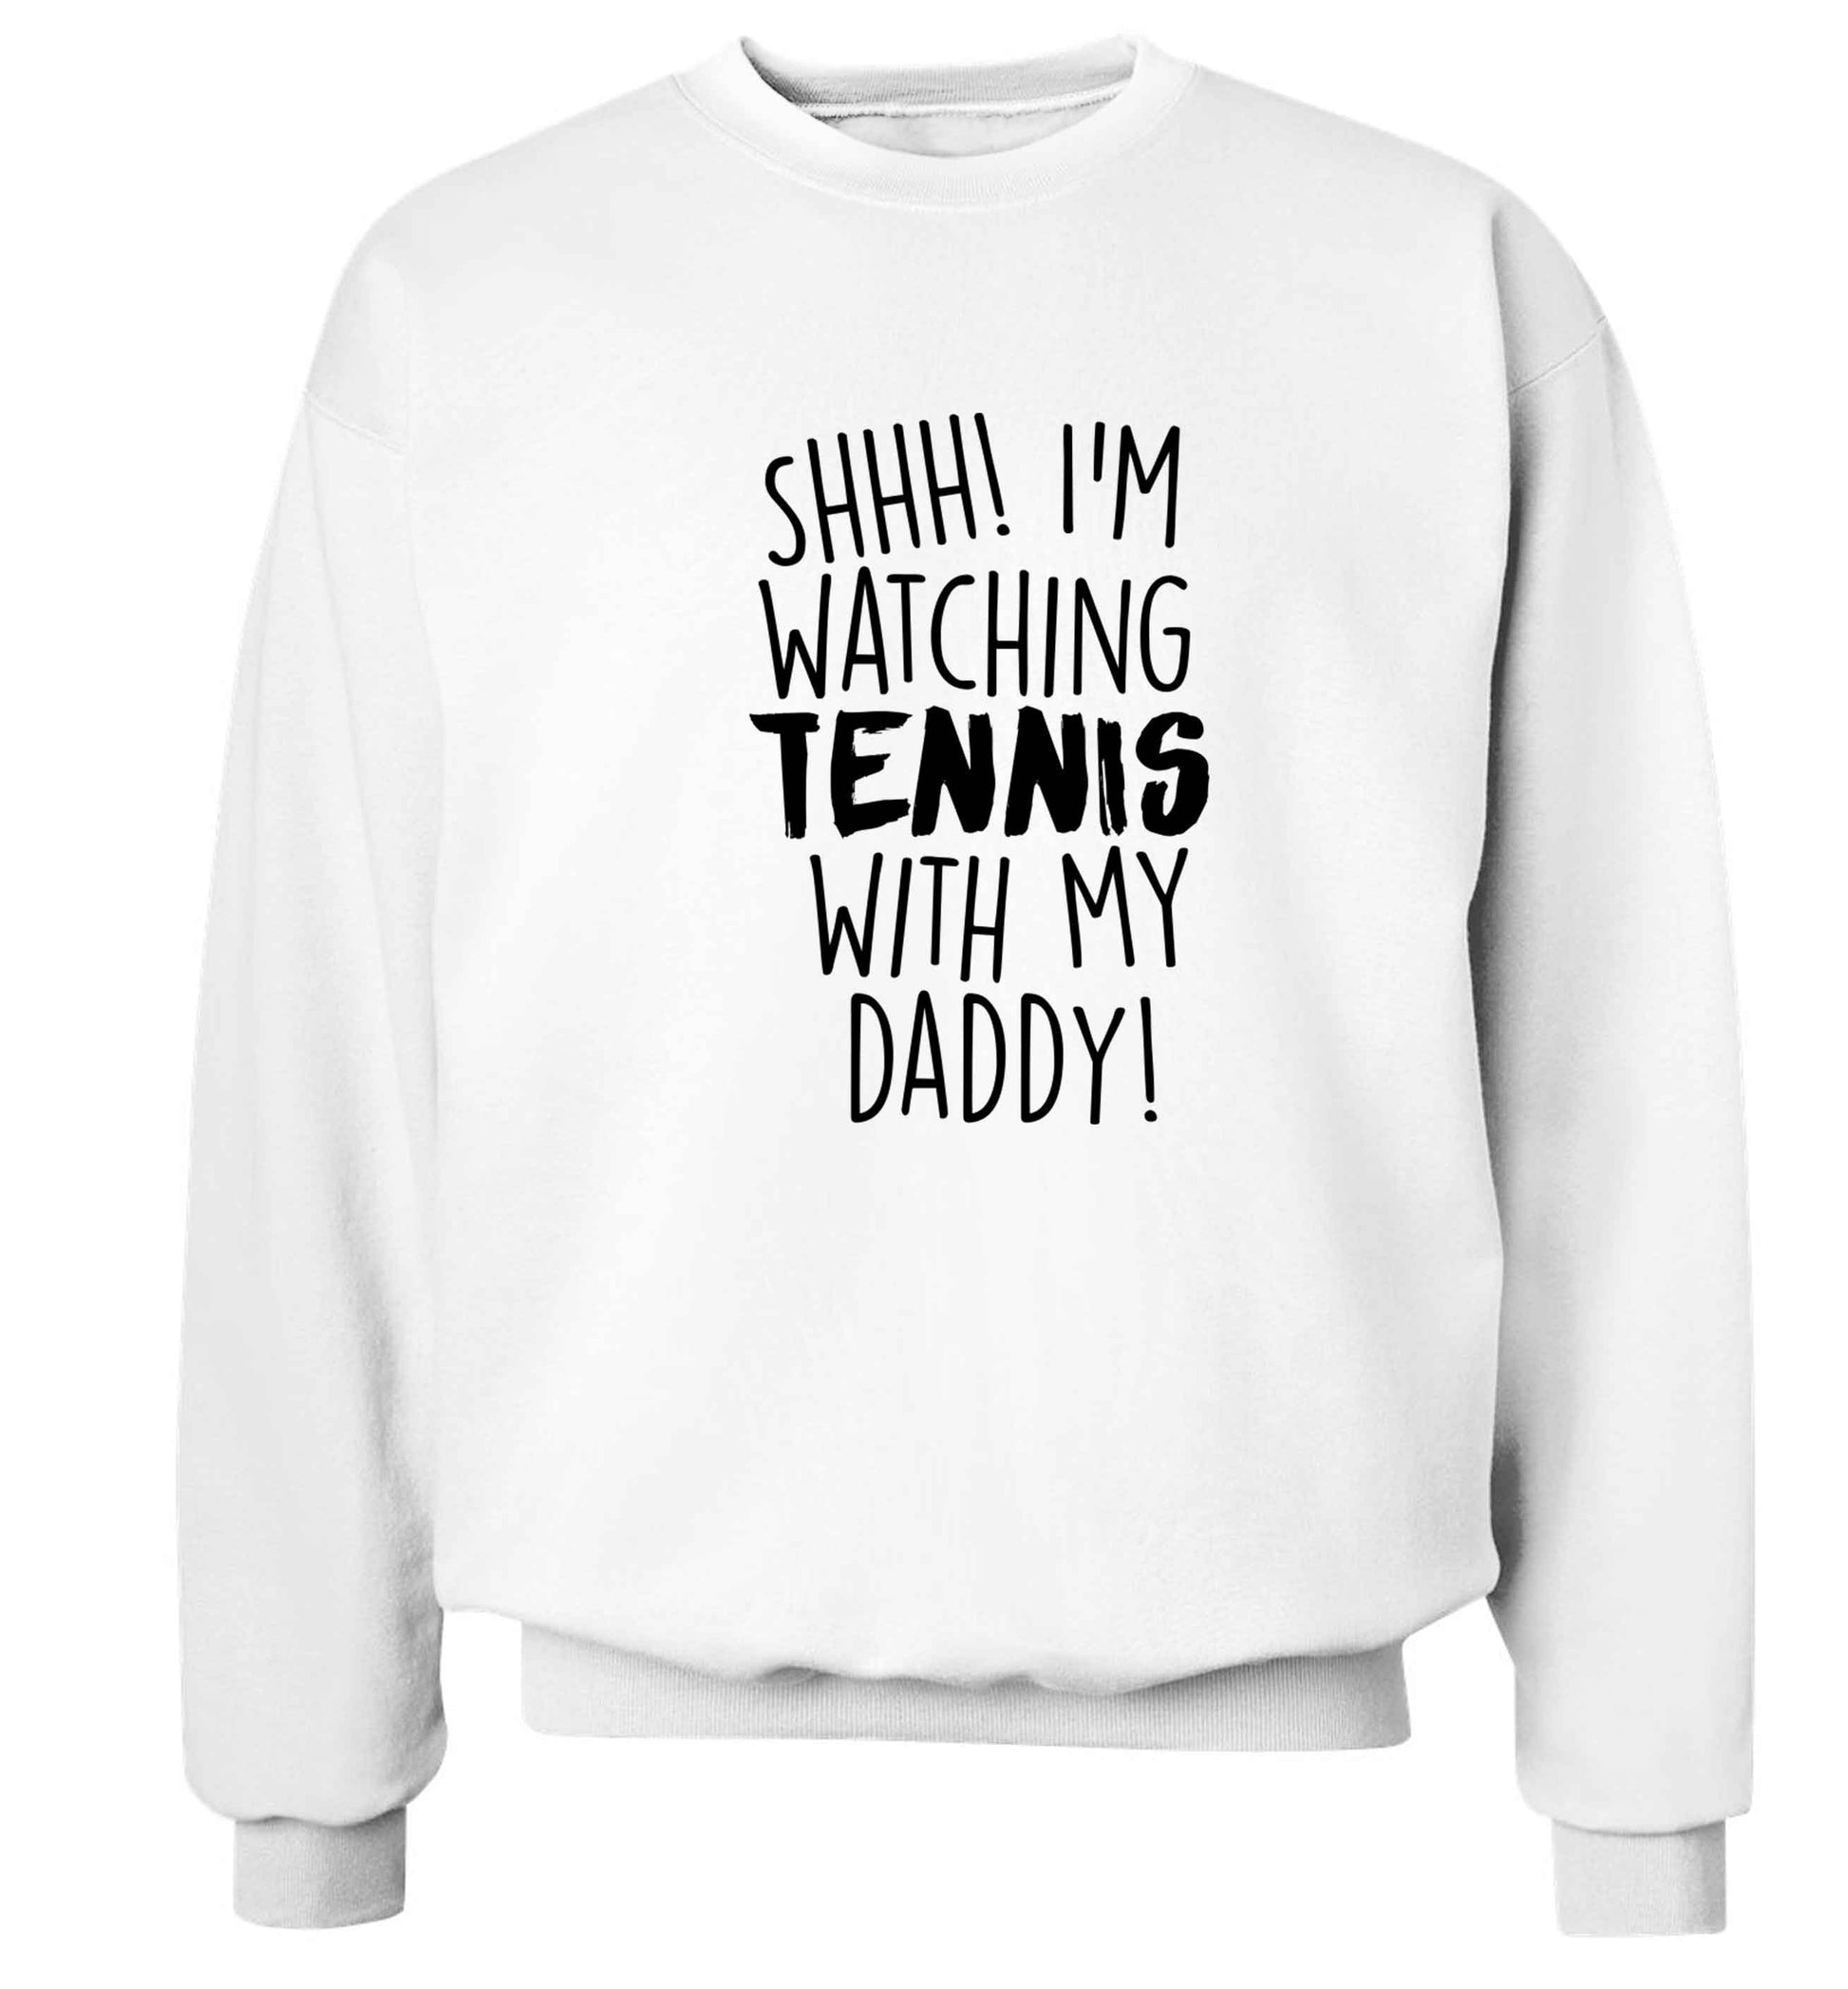 Shh! I'm watching tennis with my daddy! Adult's unisex white Sweater 2XL